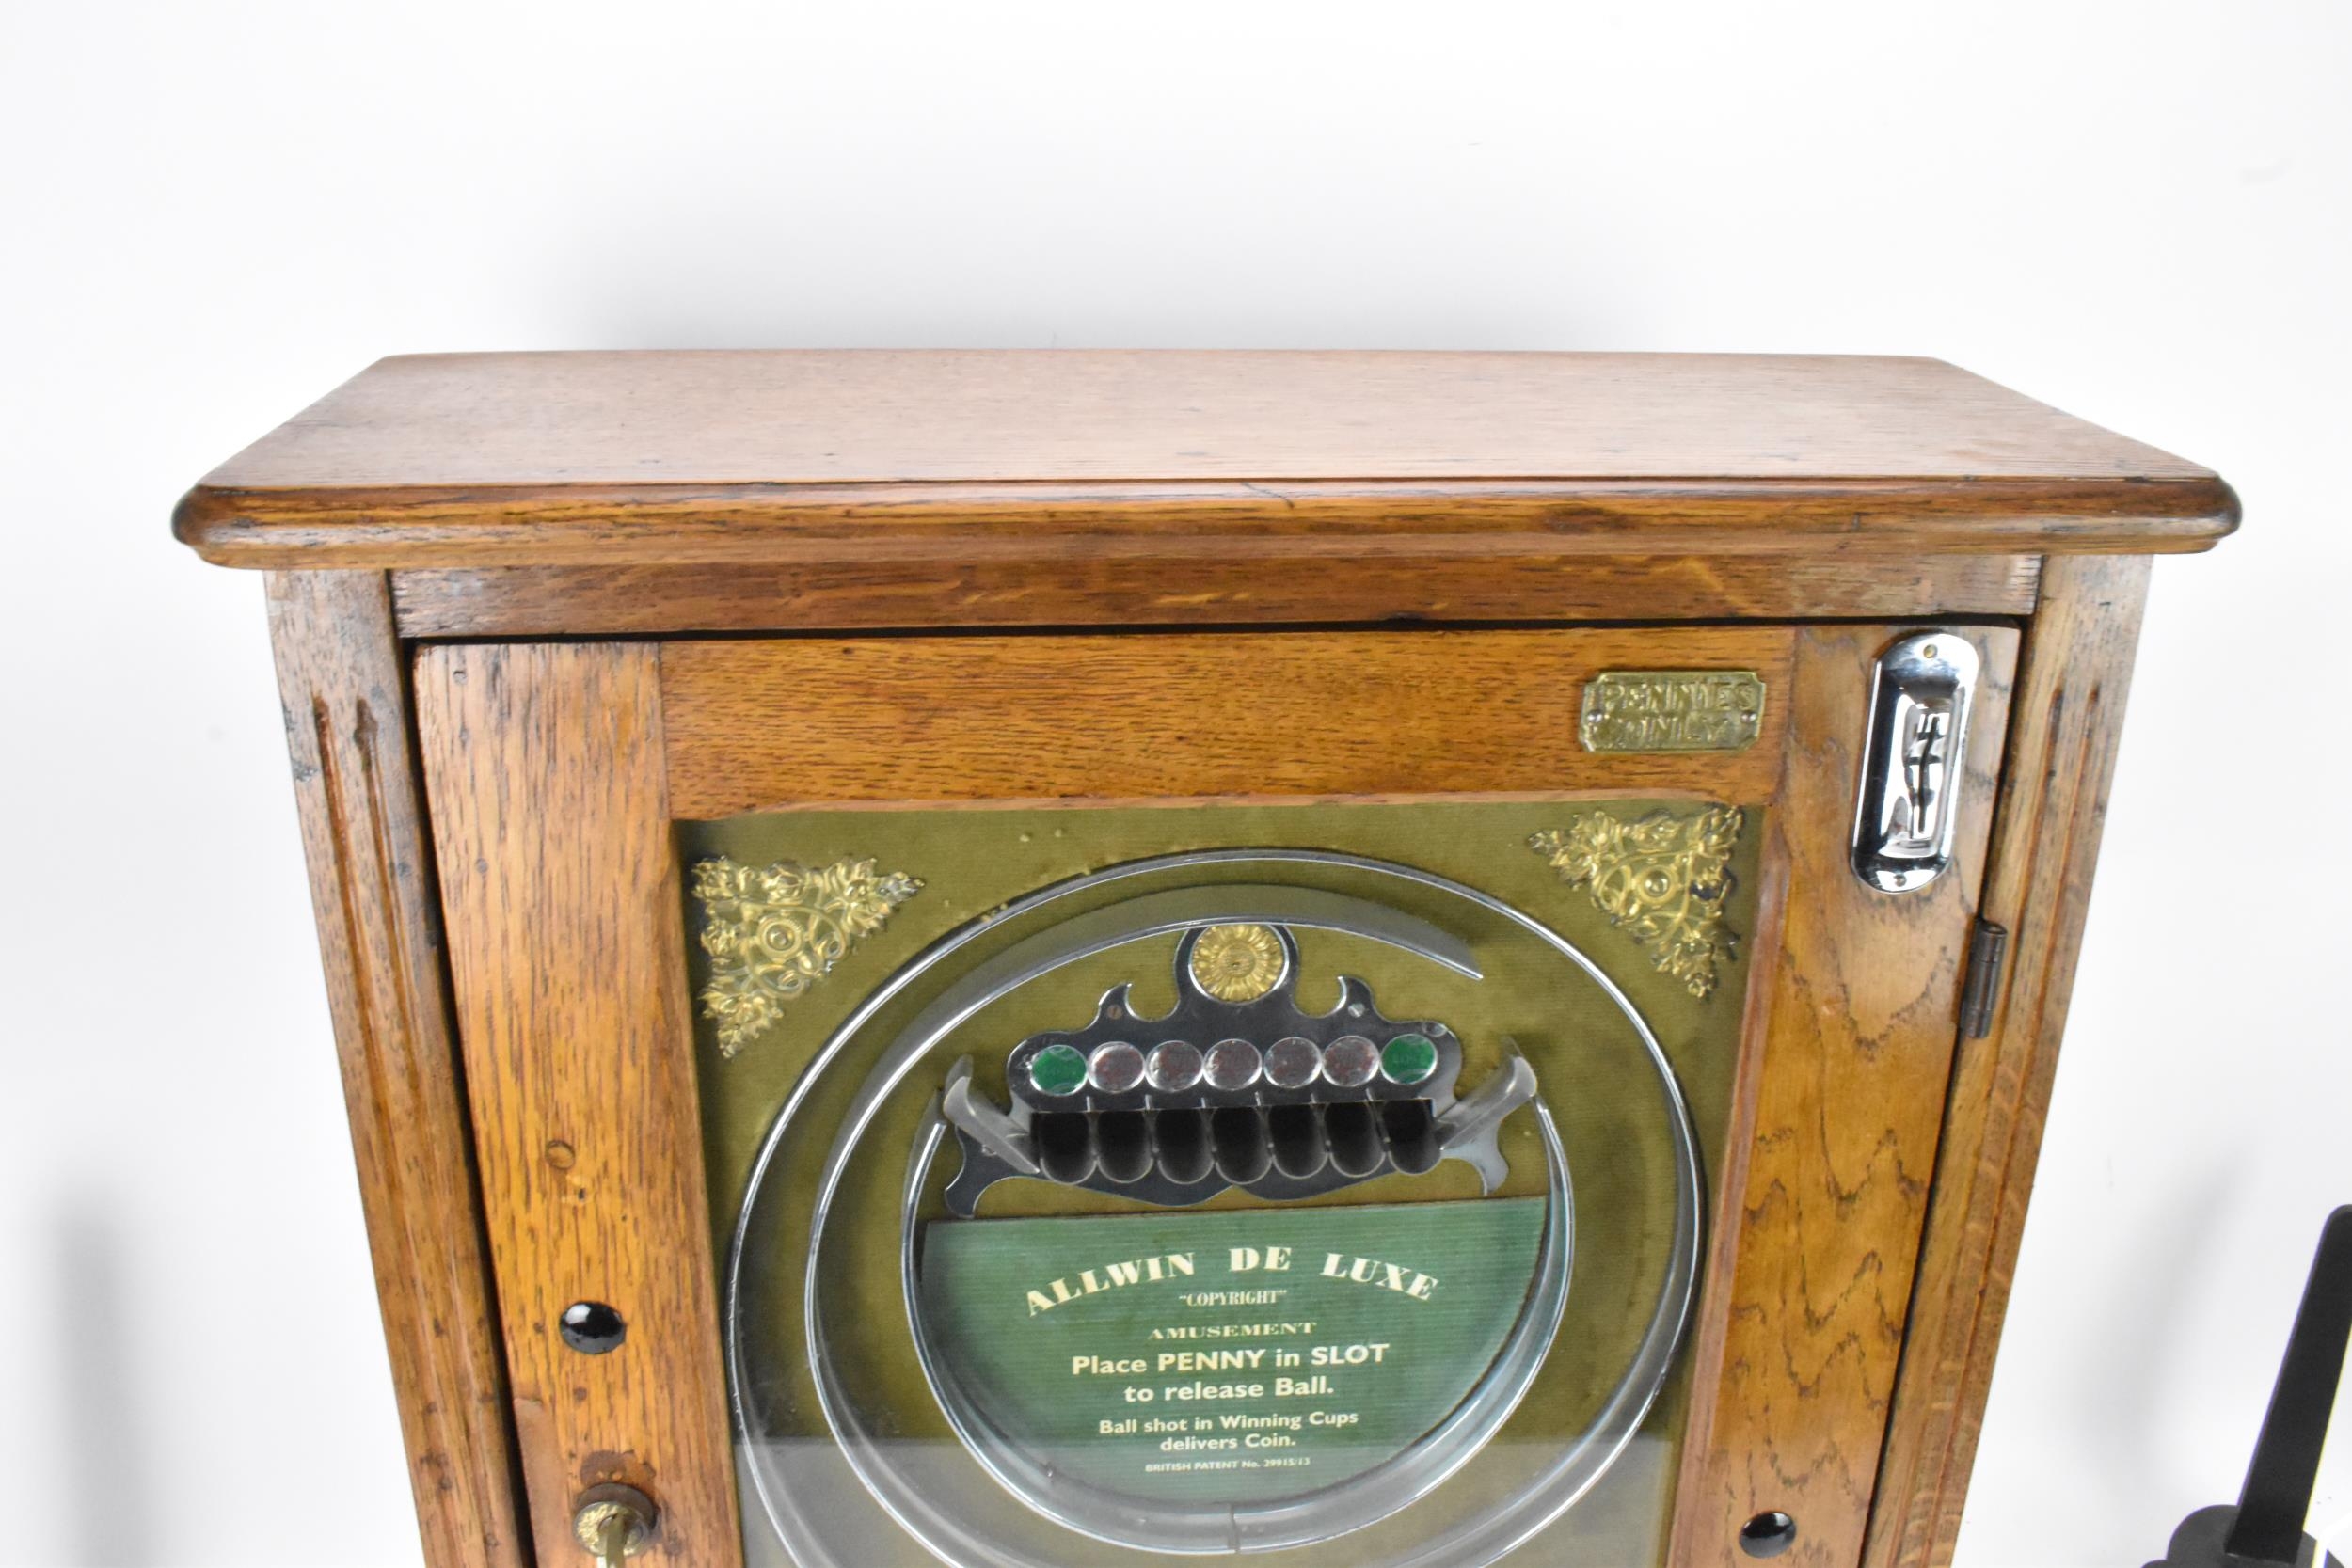 An Allwin De Luxe oak cased penny slot machine, circa 1920, with internal metal ball track, - Image 2 of 12